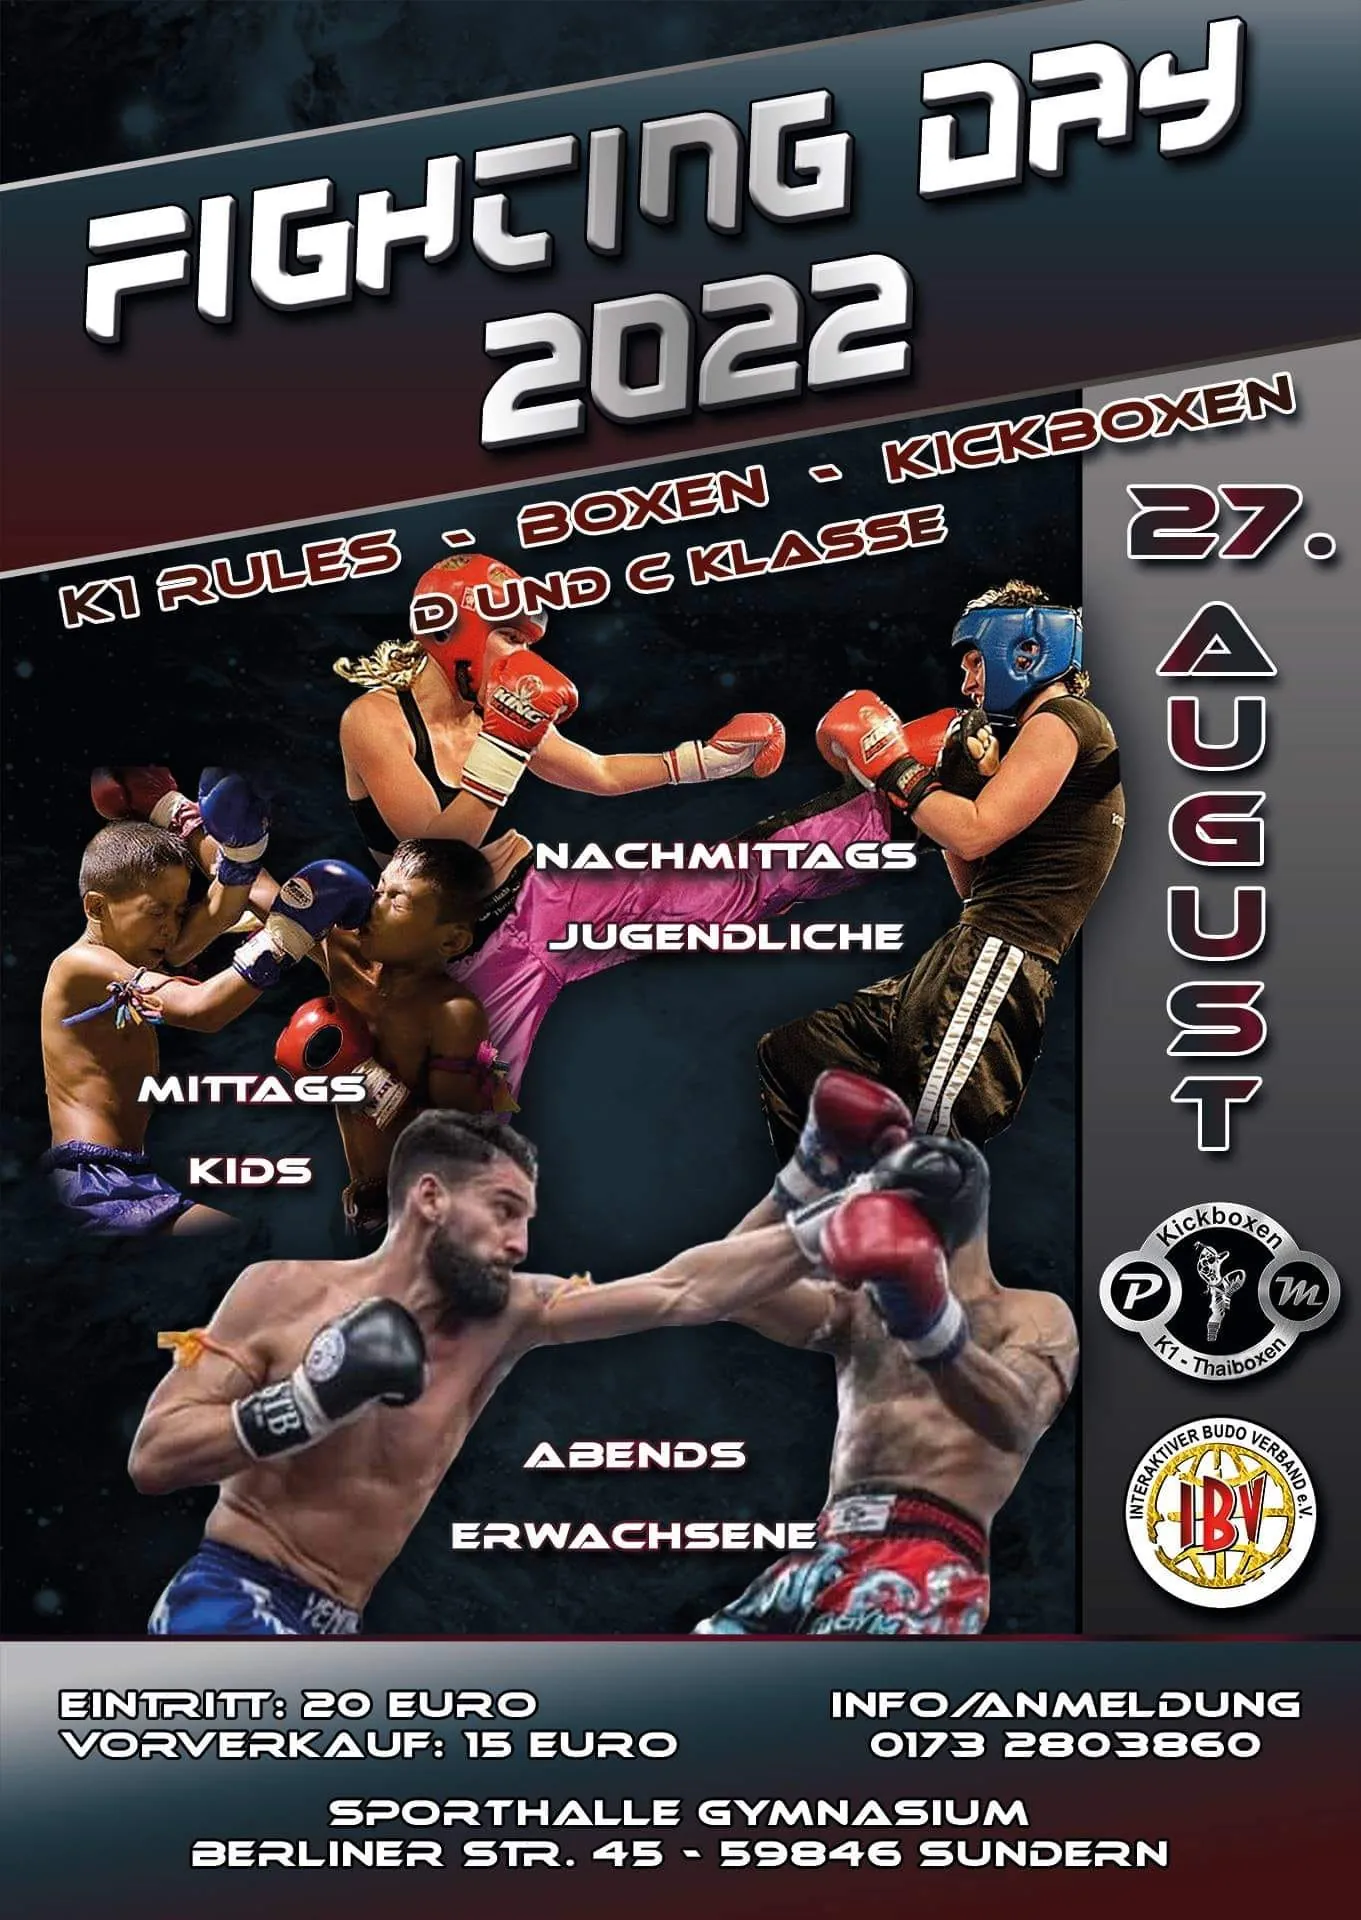 Fighting Day 2022 am 27. August in Sundern